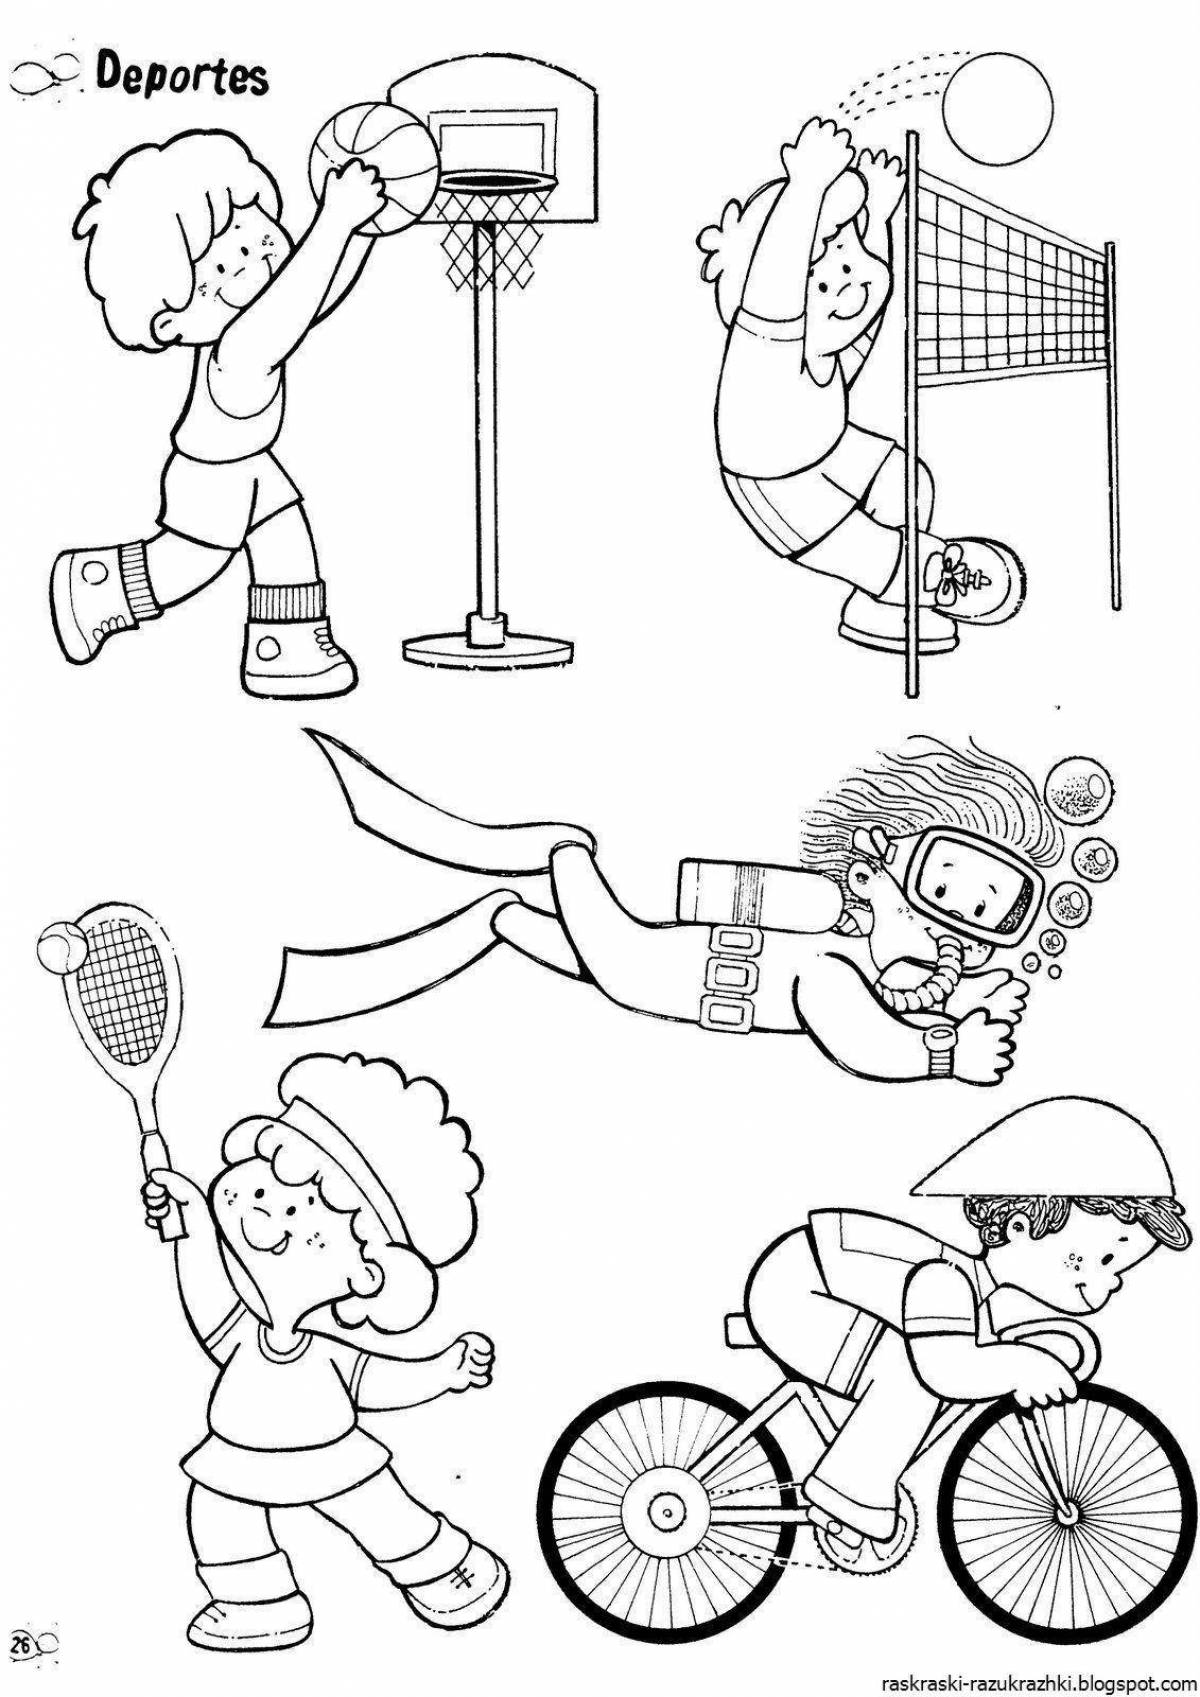 Exciting sports coloring book for kids